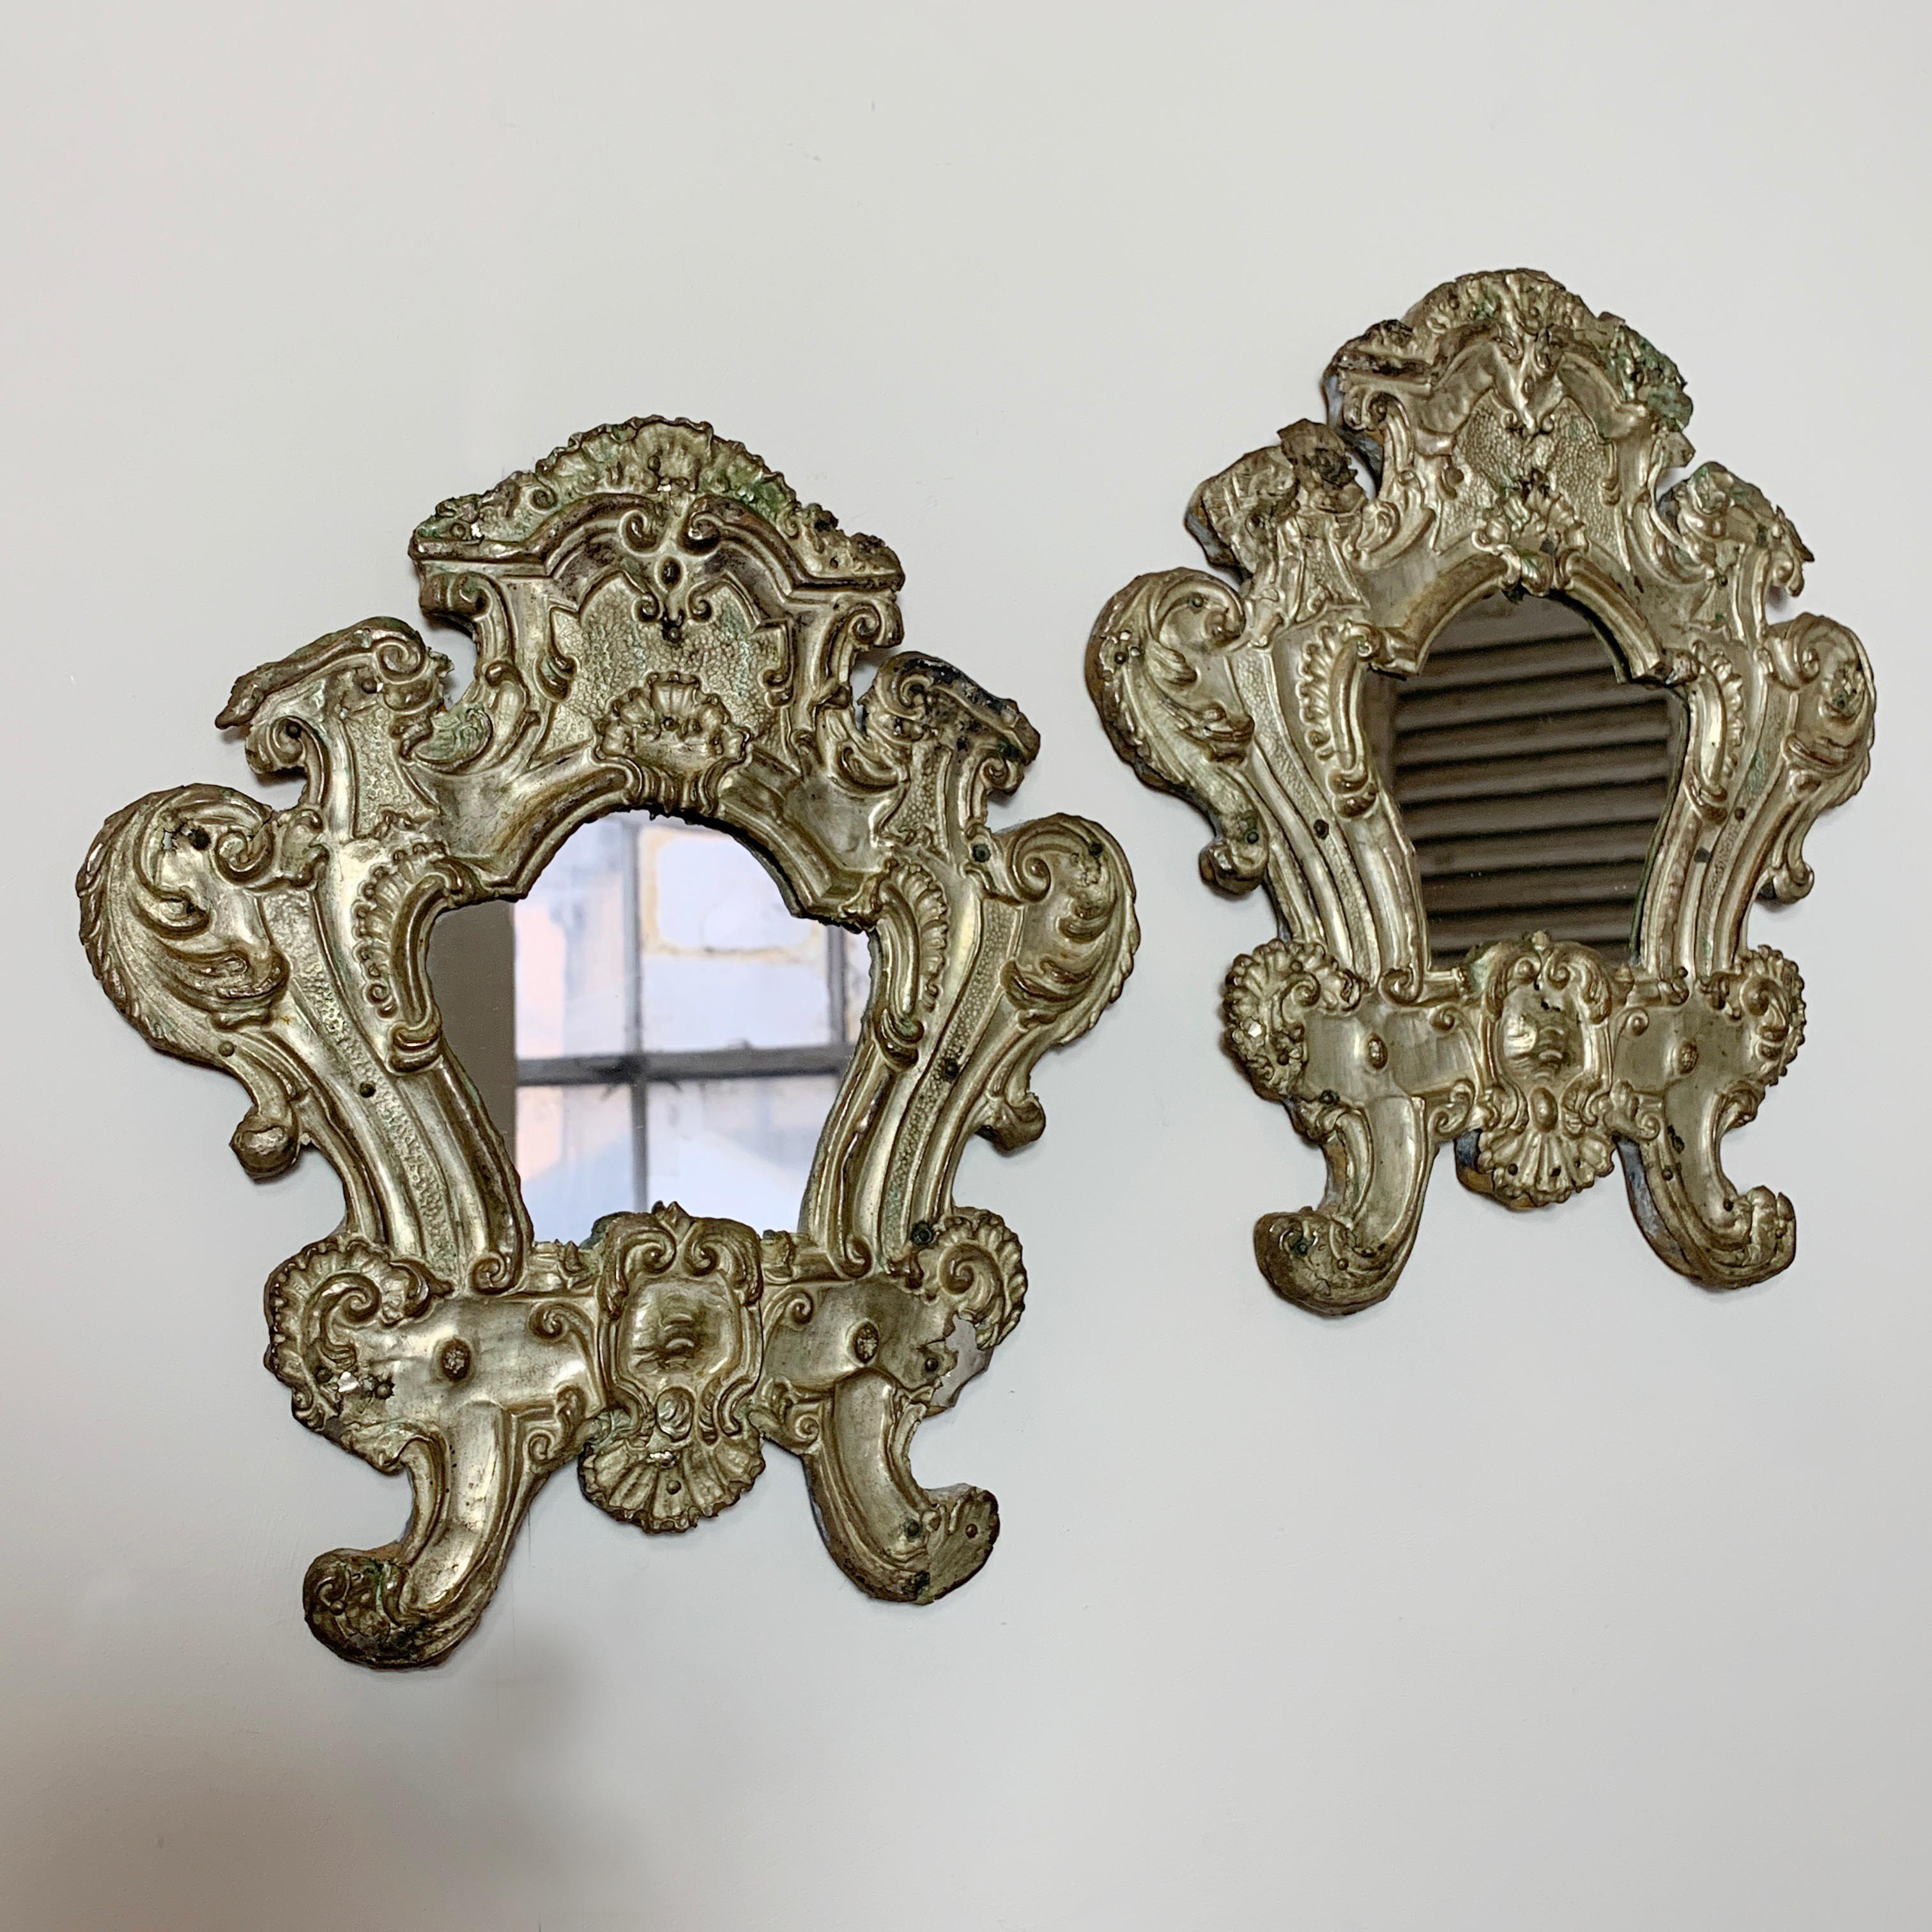 Pair of European 18th century silver plated Baroque mirrors
circa 1725
Beautiful and unique antique handcrafted pieces
The carved wooden frame is covered with silver plated hand beaten copper
Hand beaten copper has been crafted in a decorative